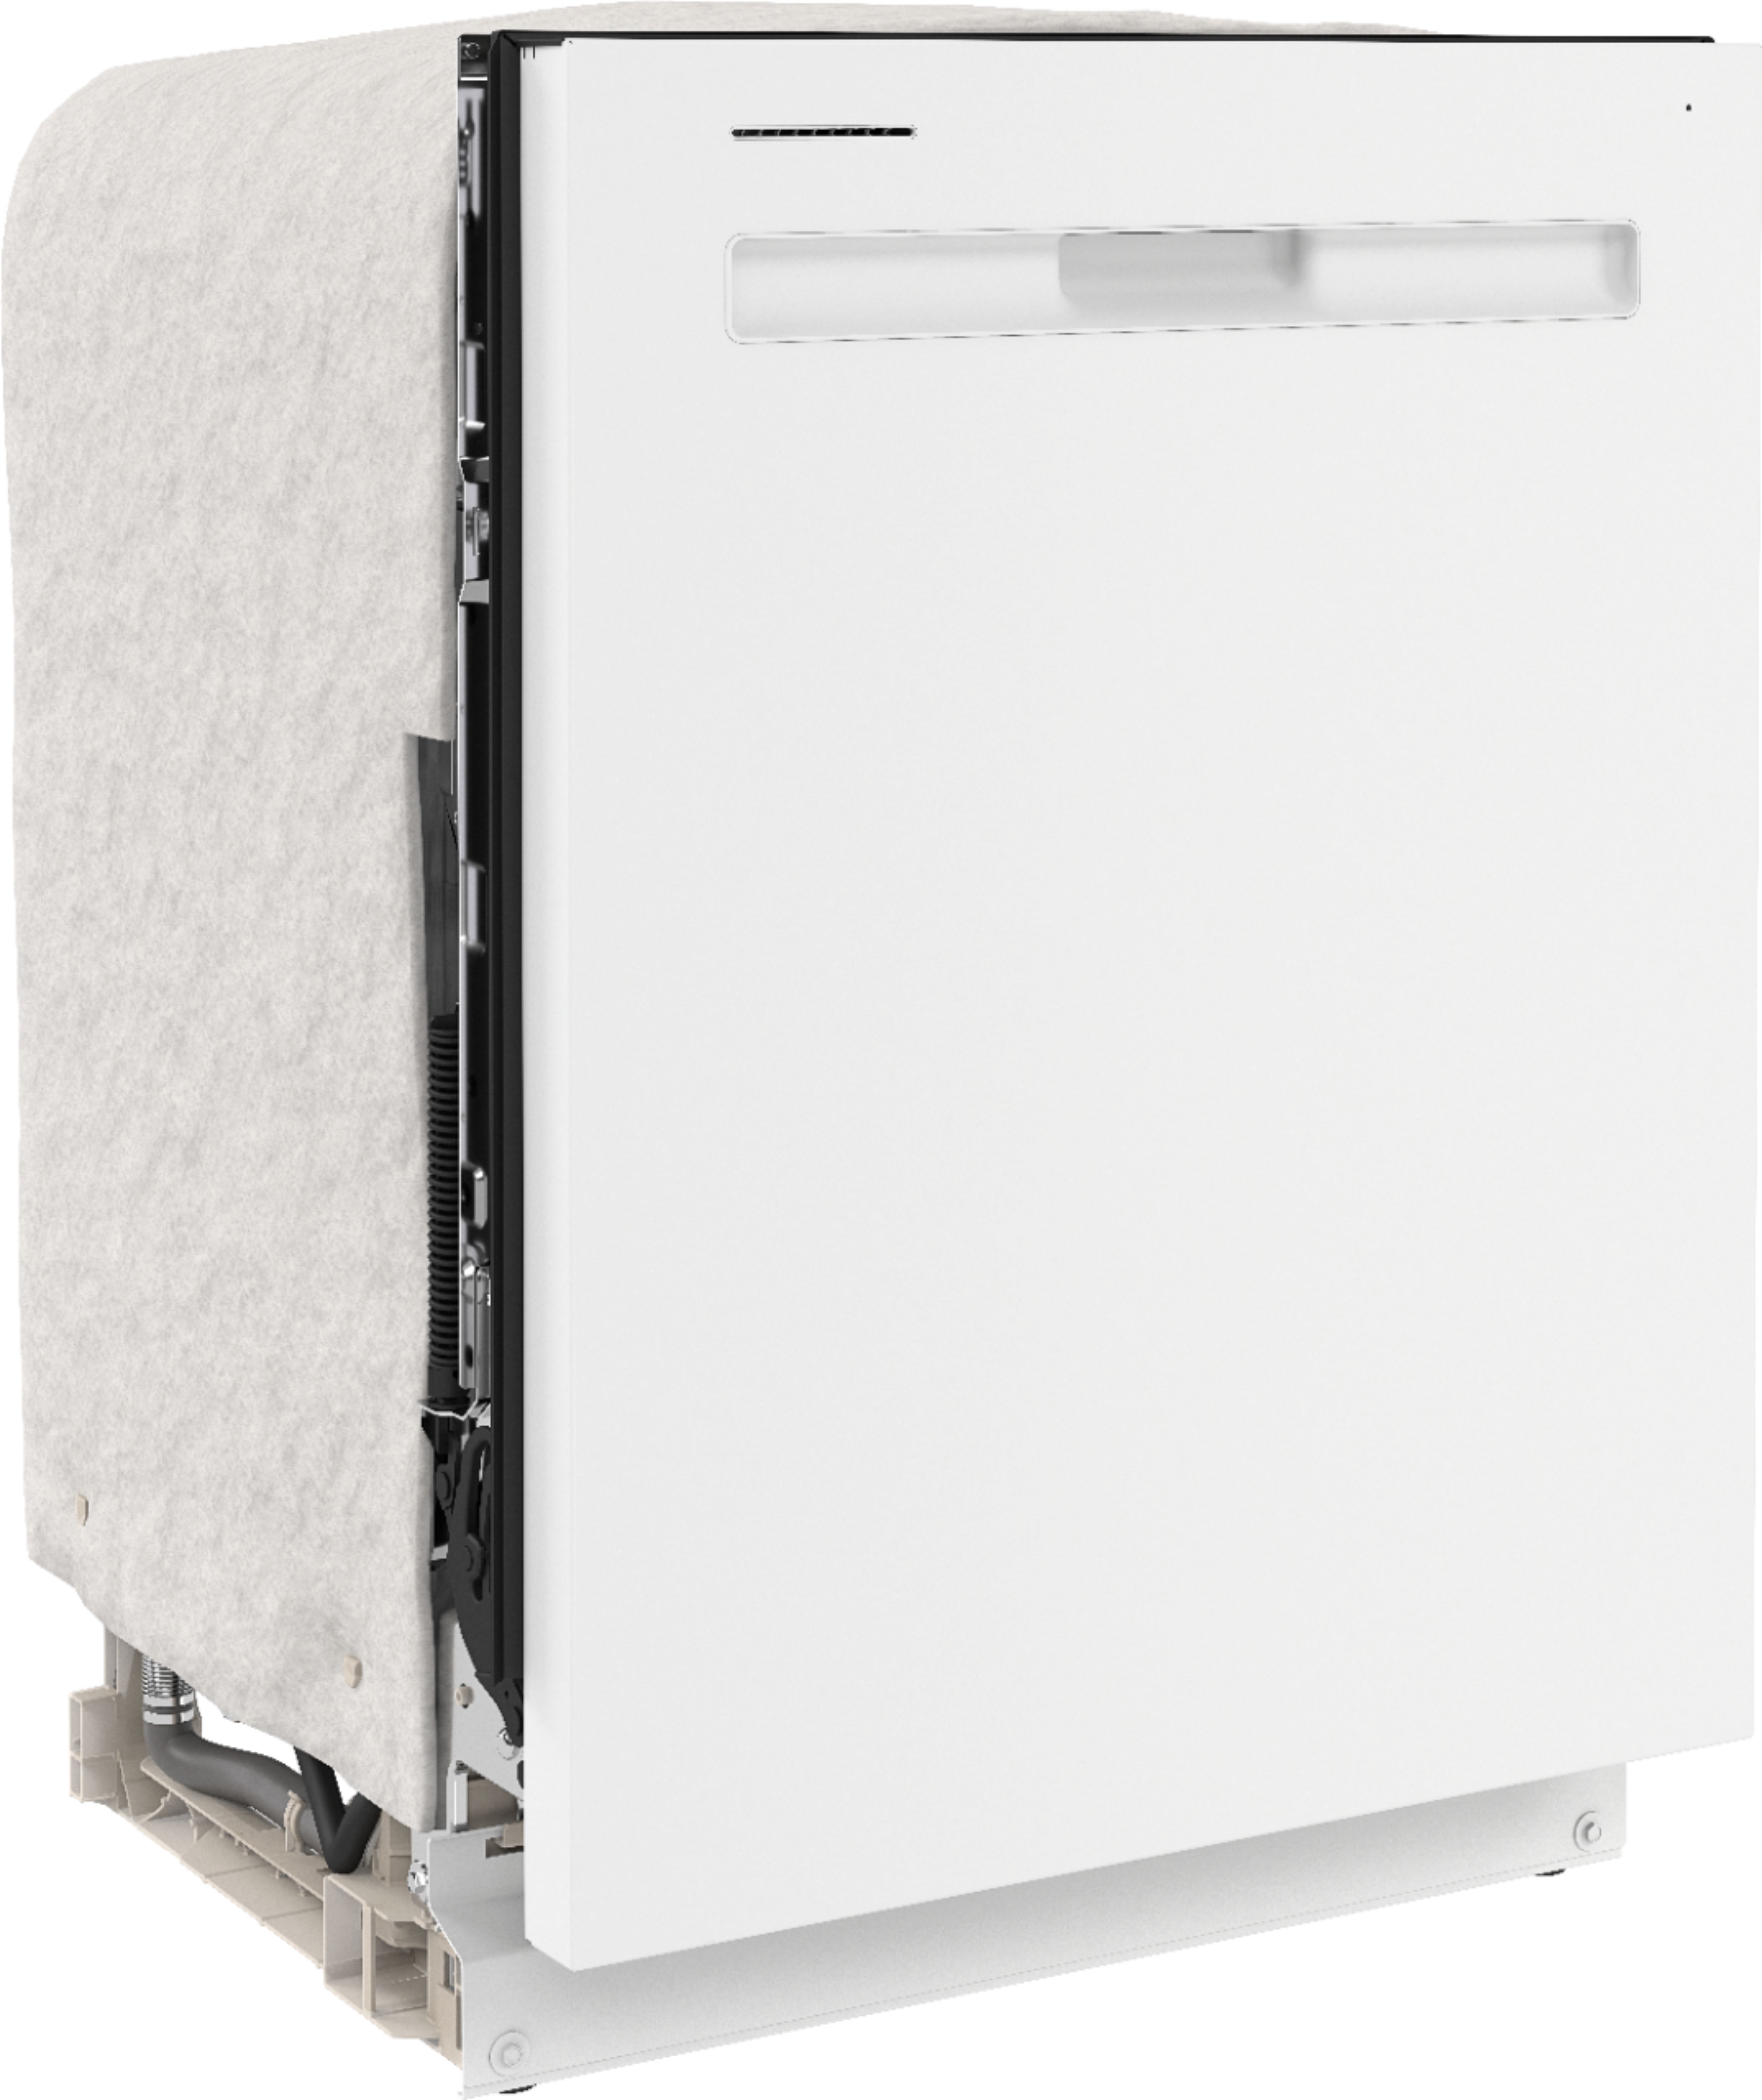 Angle View: Maytag - Top Control Built-In Dishwasher with Stainless Steel Tub, Dual Power Filtration, 3rd Rack, 47dBA - White